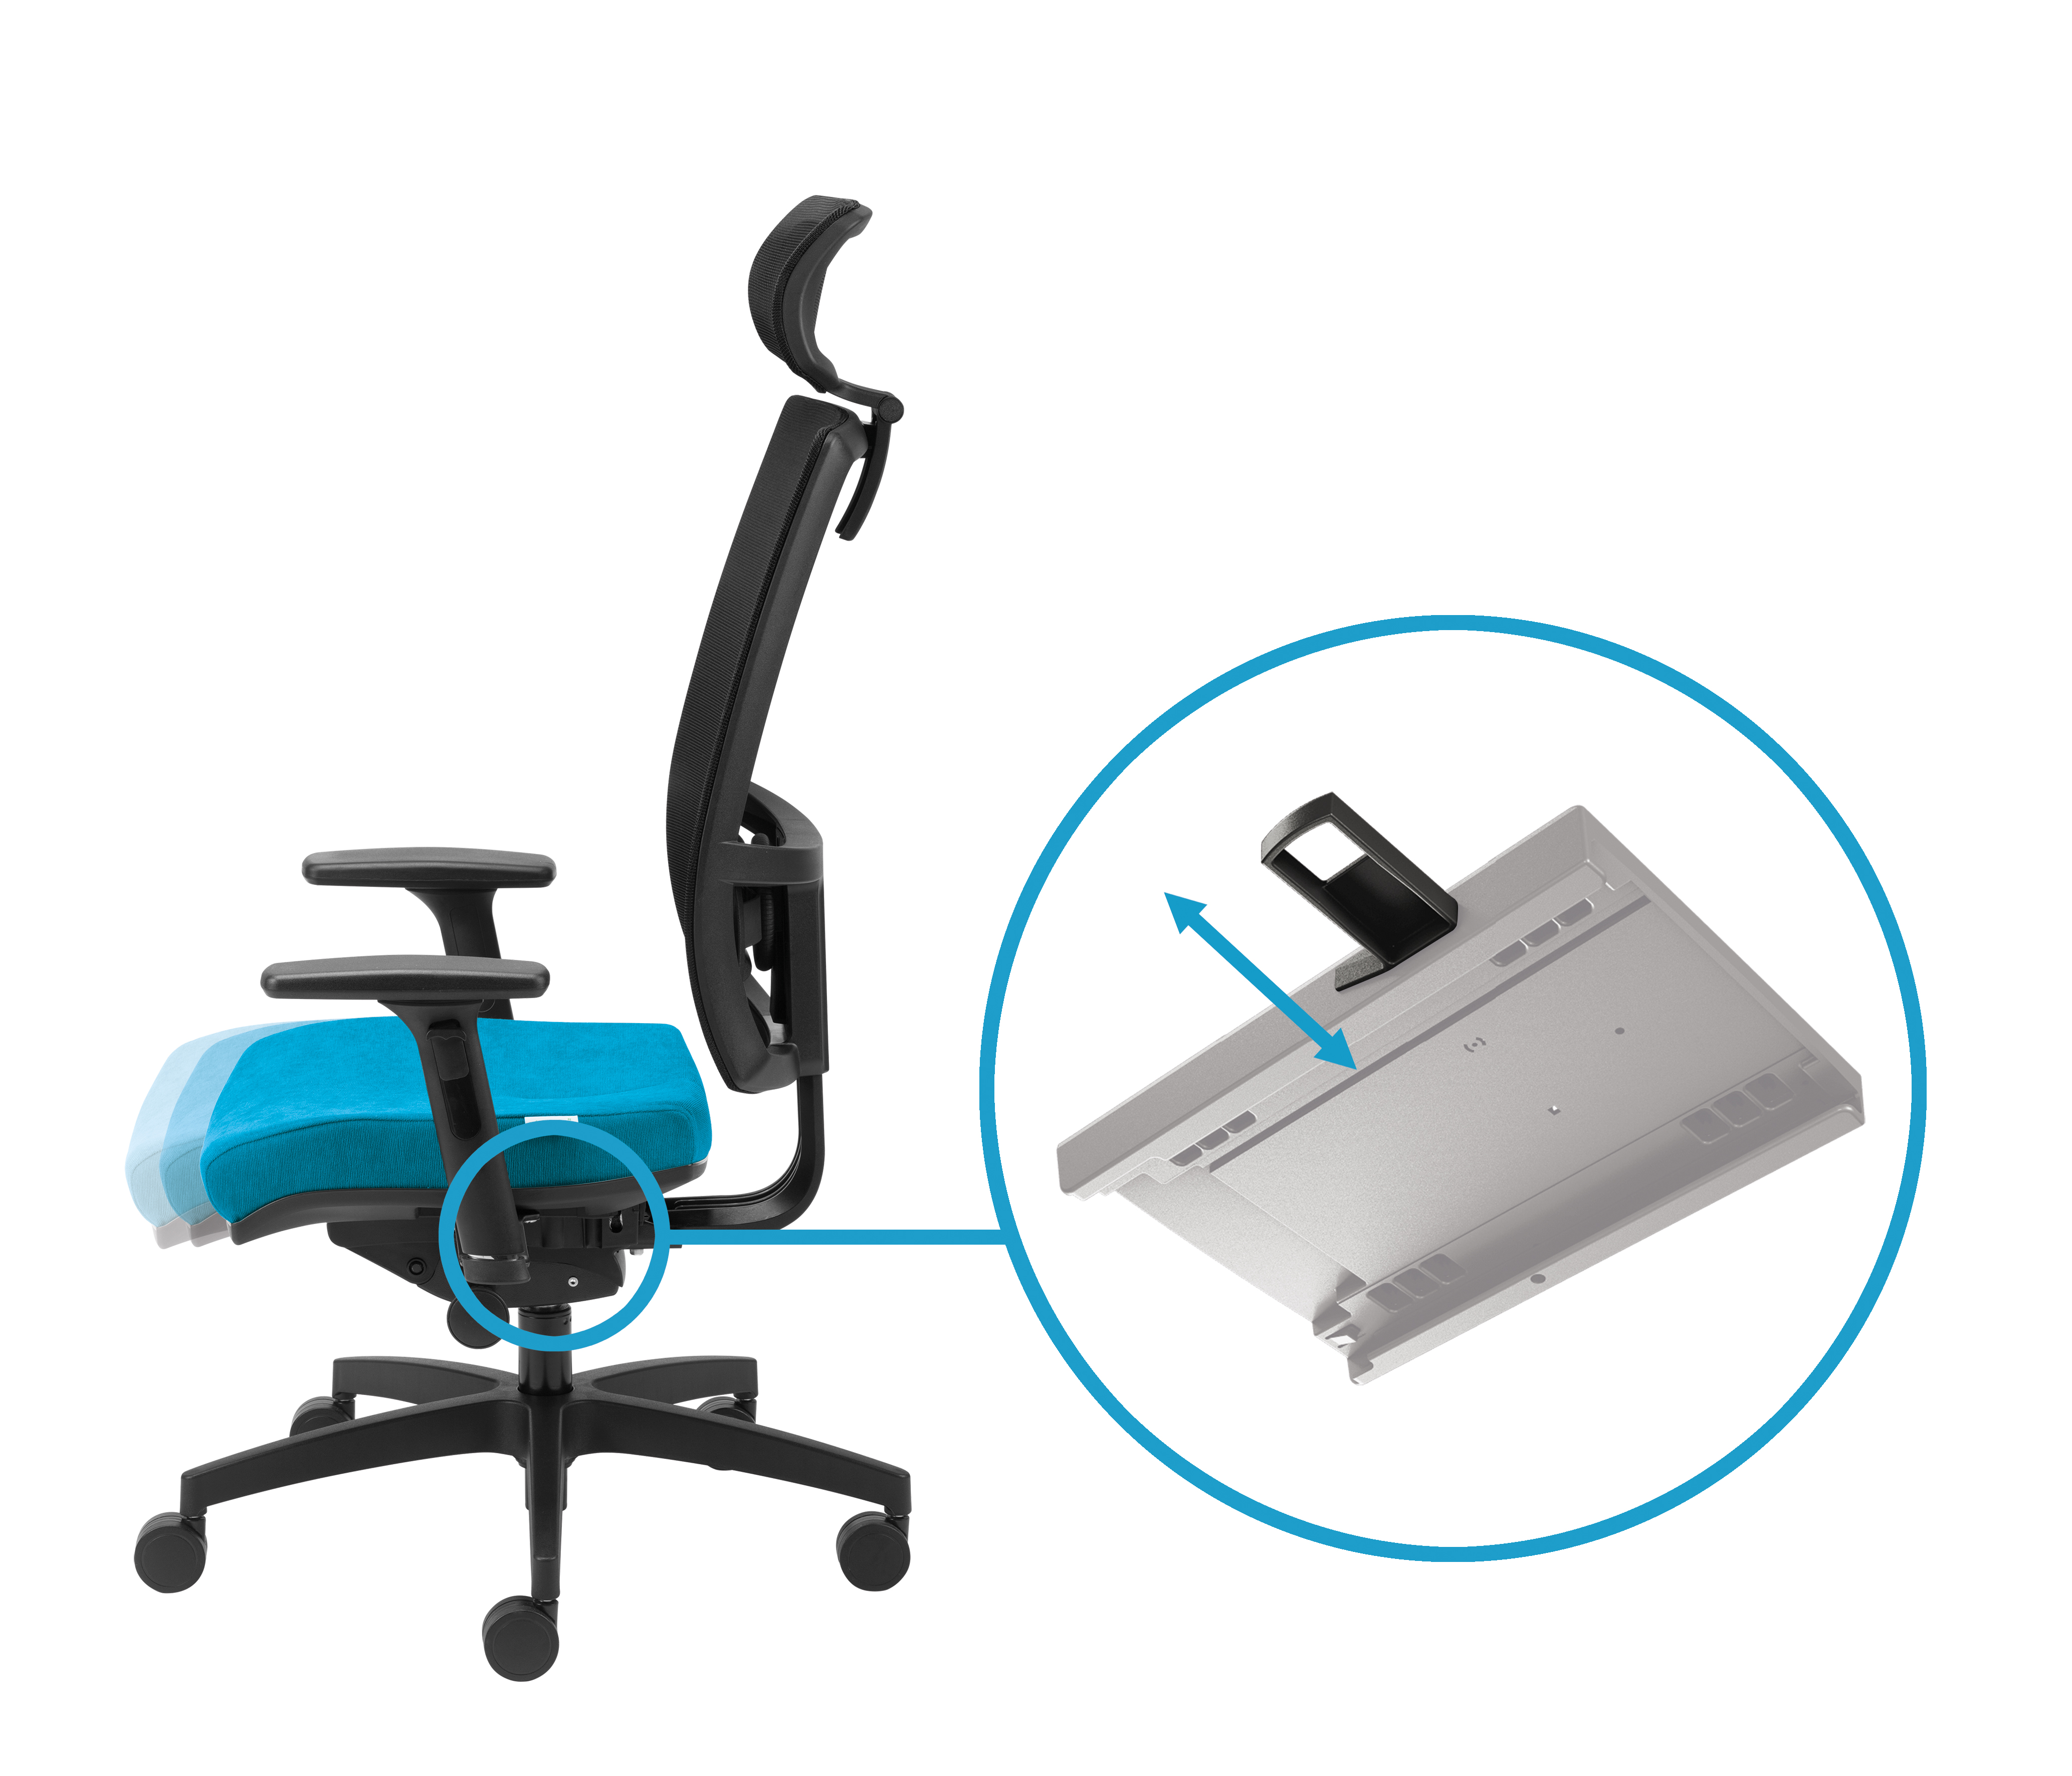 Seat slider adjusts the seat depth with a lock in 5 positions by the lever